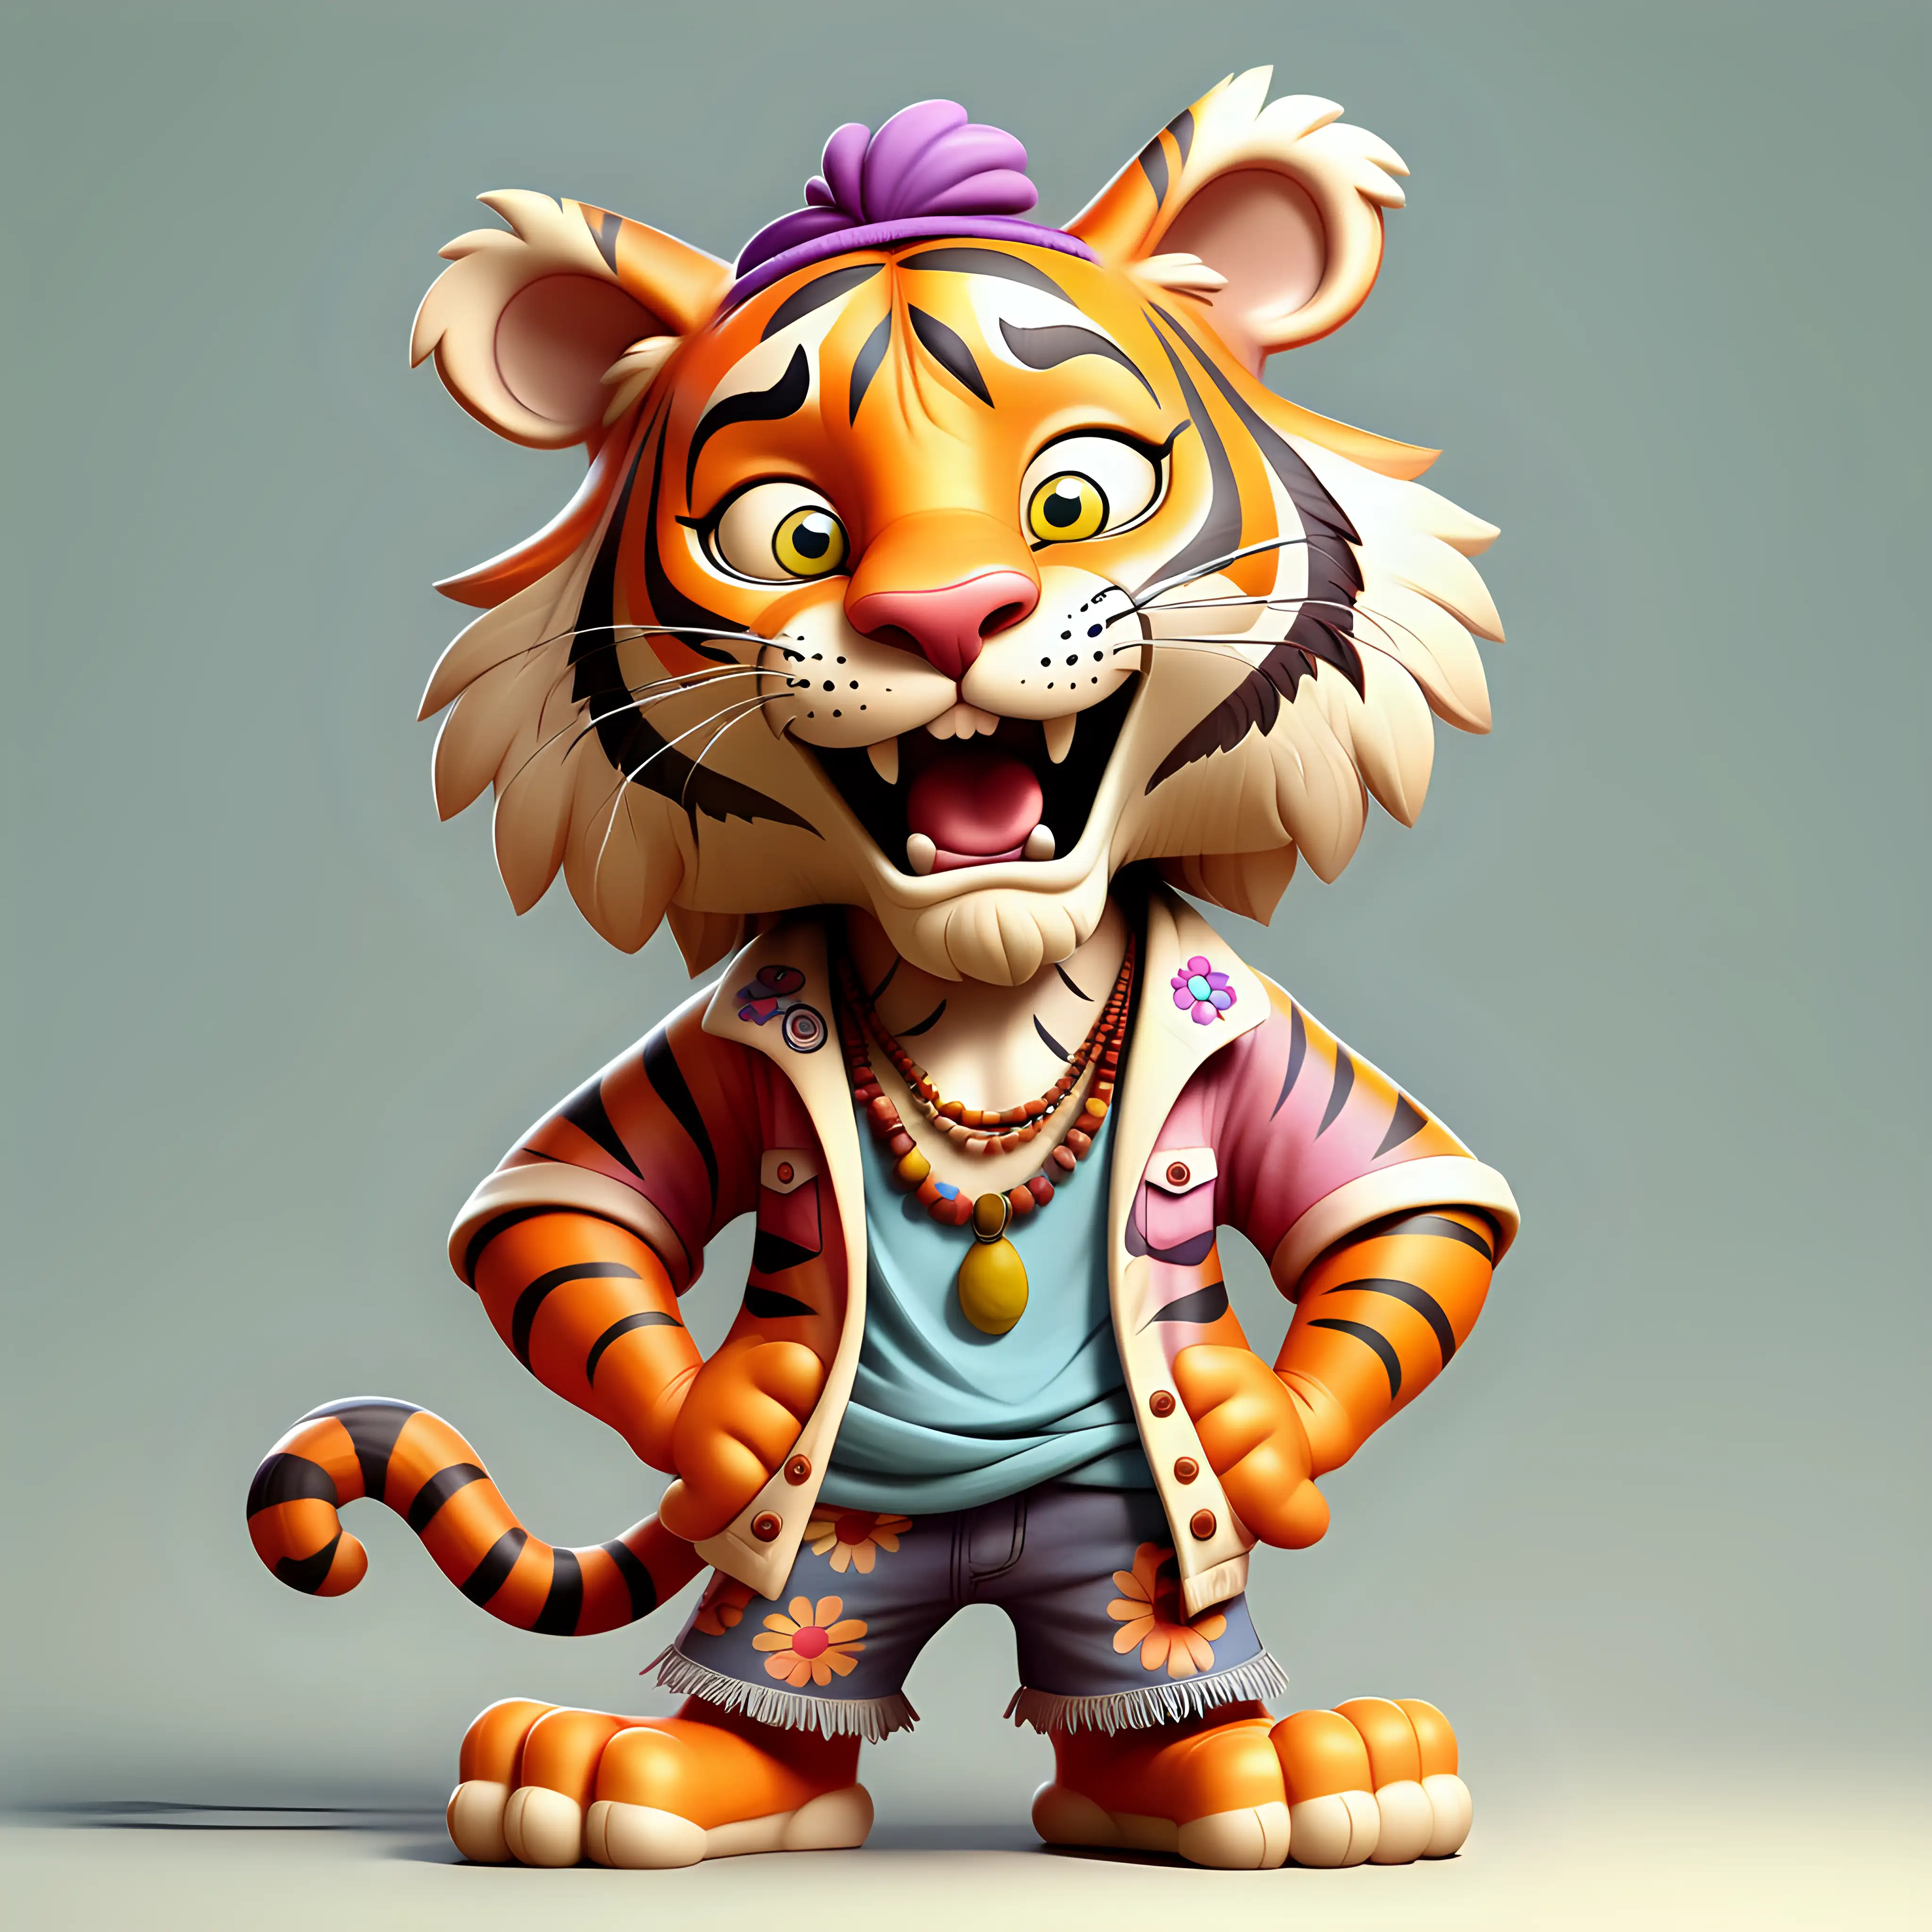 Cute Funny Tiger in Hippie Clothes Whimsical Cartoon Illustration